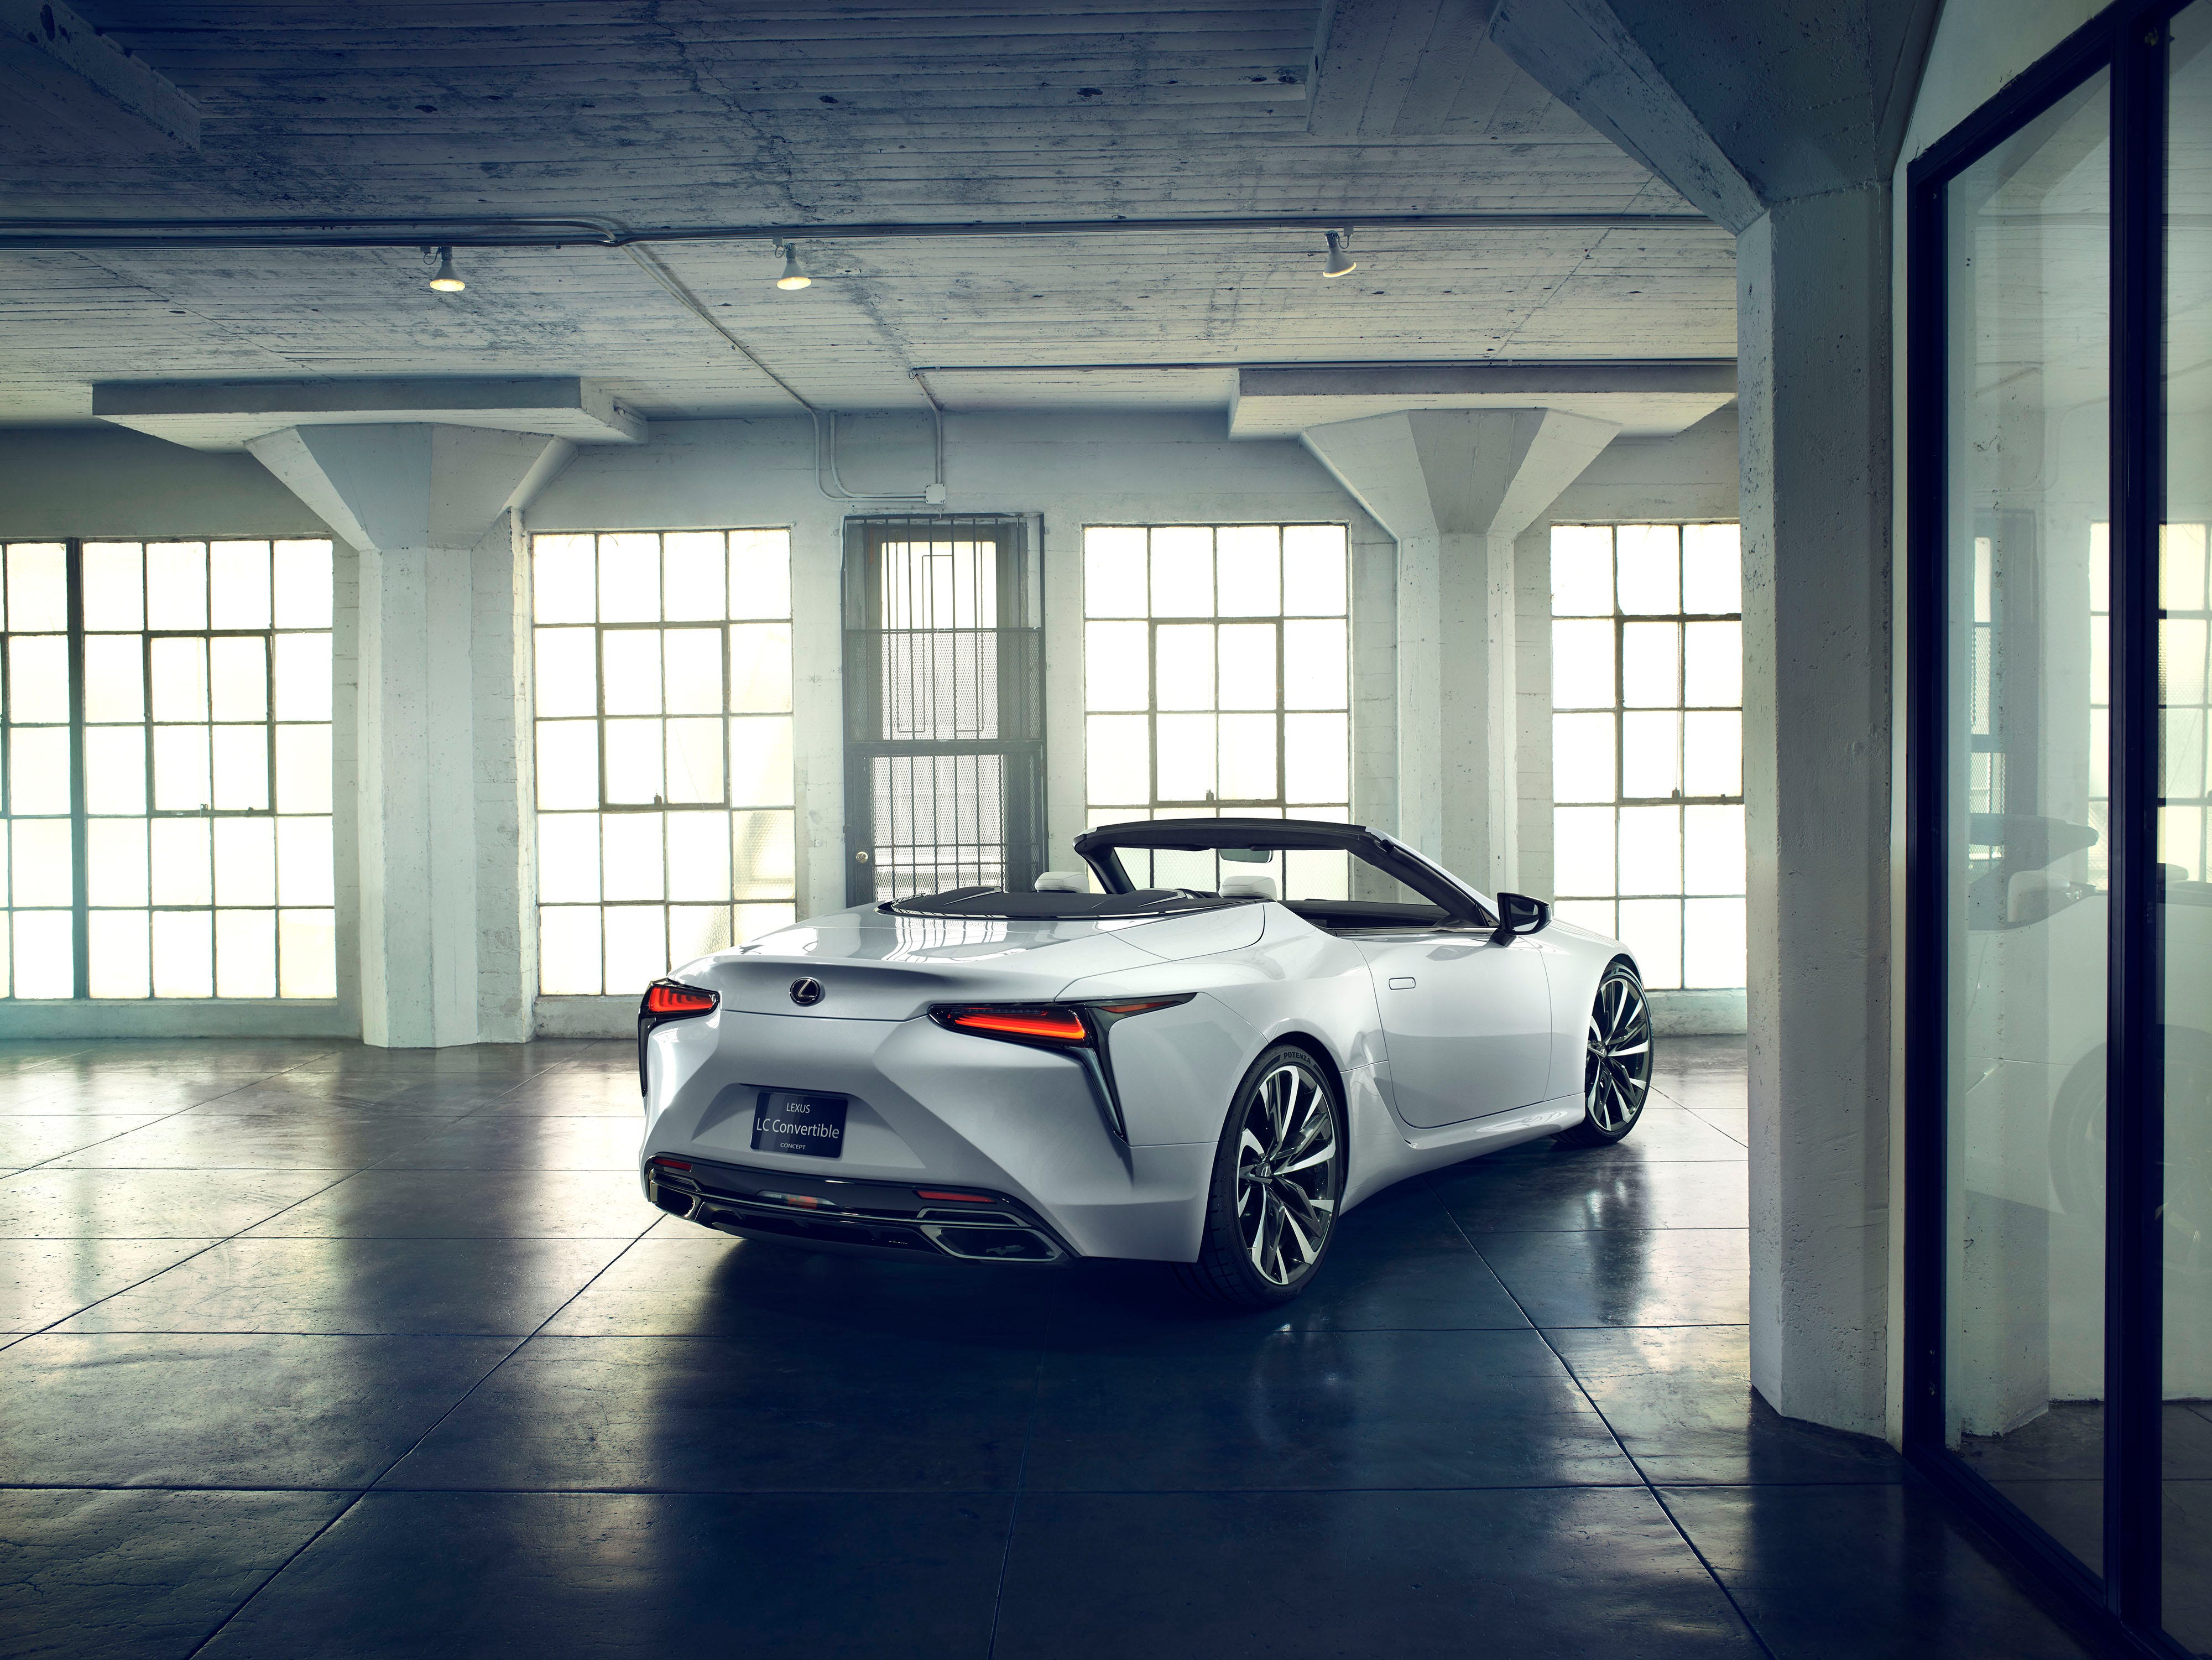 The Lexus LC Convertible Concept will make its debut at the 2019 North American International Auto Show.